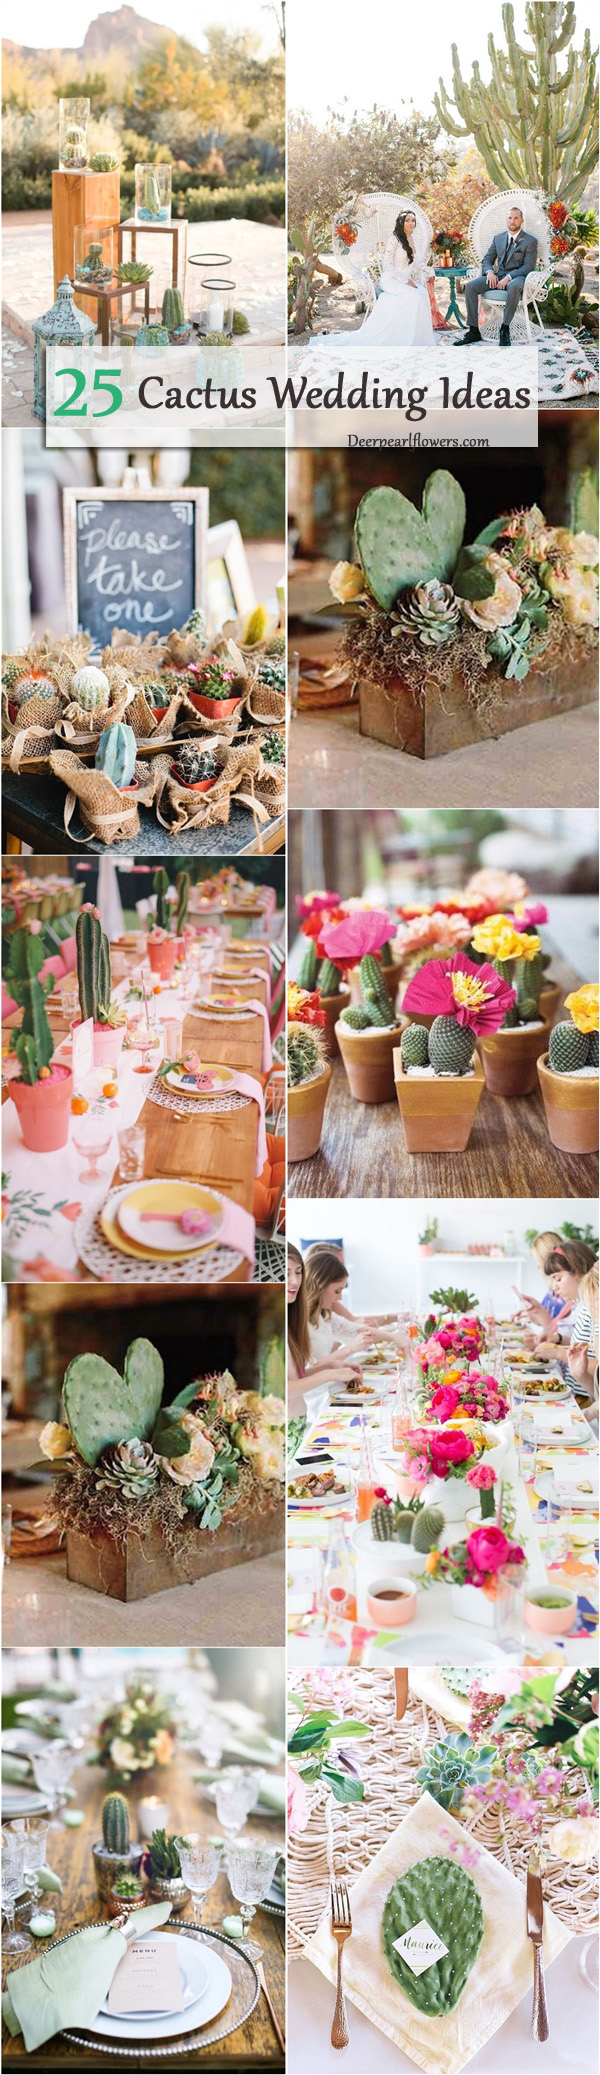 rustic cactus wedding ideas and themes